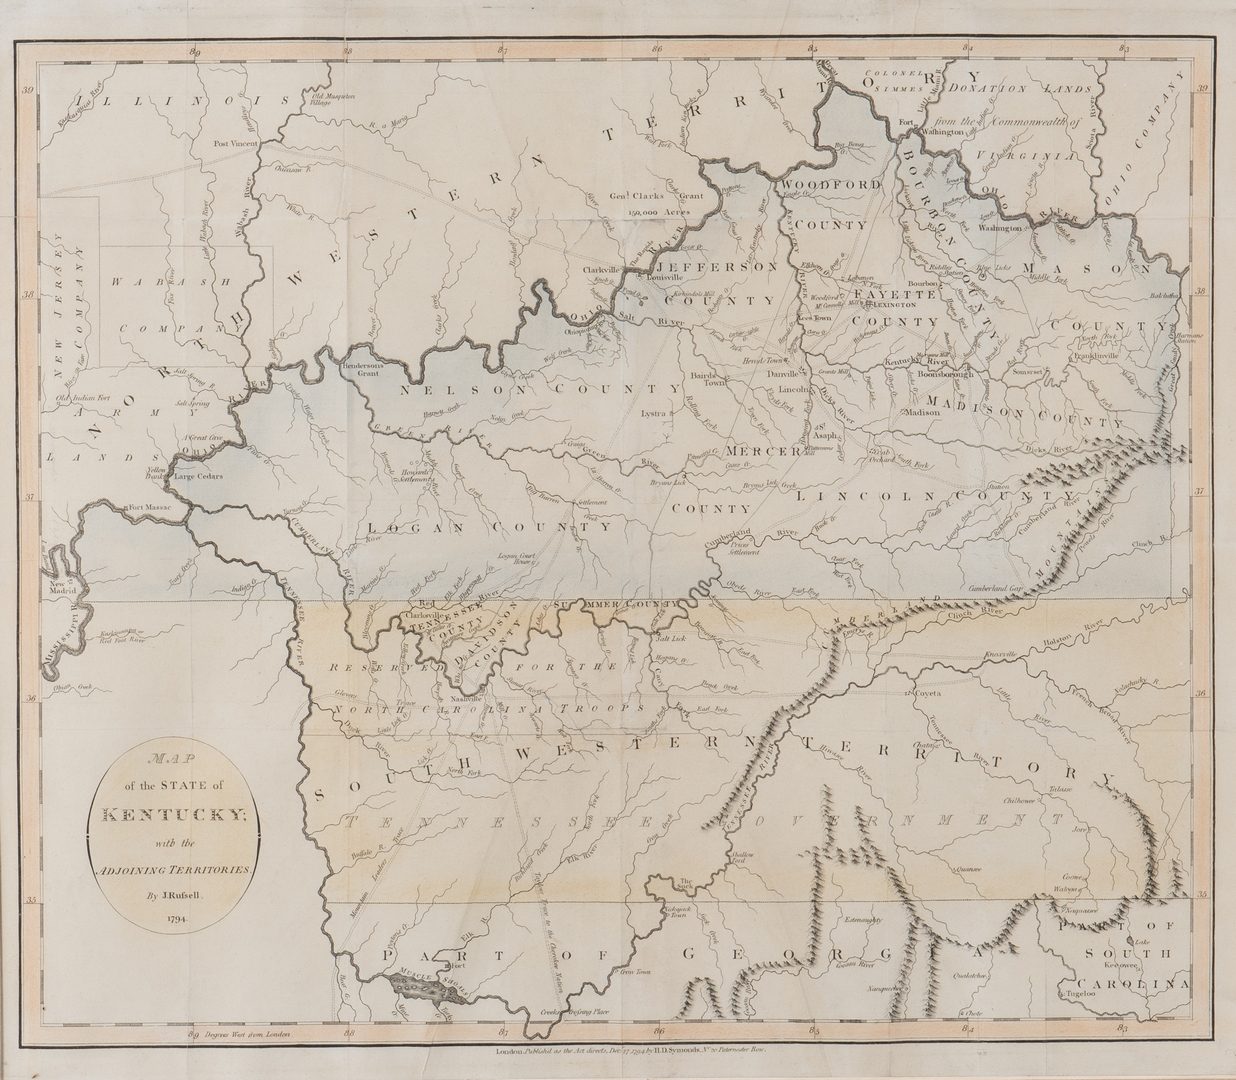 Lot 246: Map of Kentucky, 1794, J. Russell, showing Tennessee as SW Territory